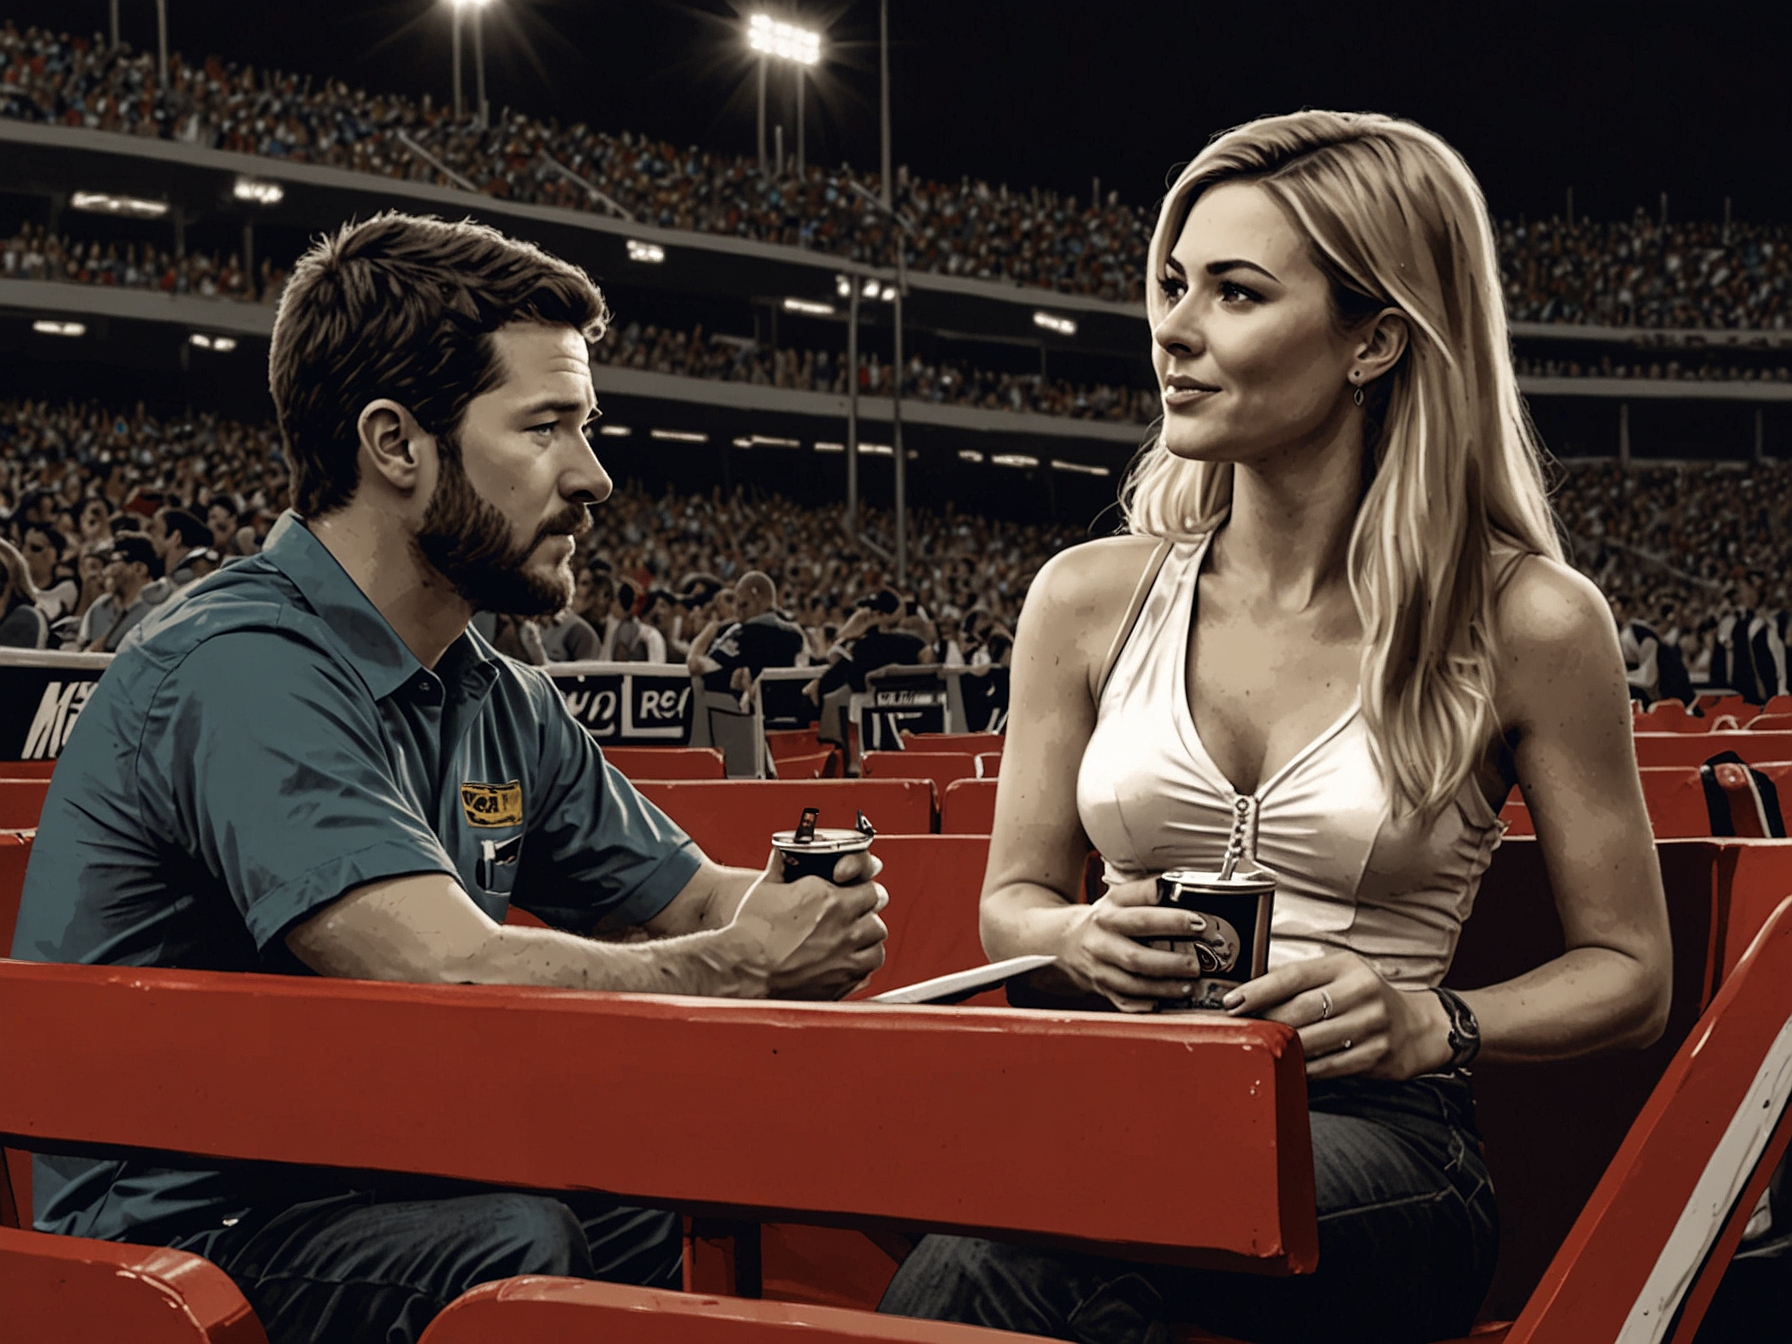 Emily Collins spotted in the VIP section at a NASCAR race, watching intently as Martin Truex Jr. competes, contributing to rumors of their possible romantic involvement.